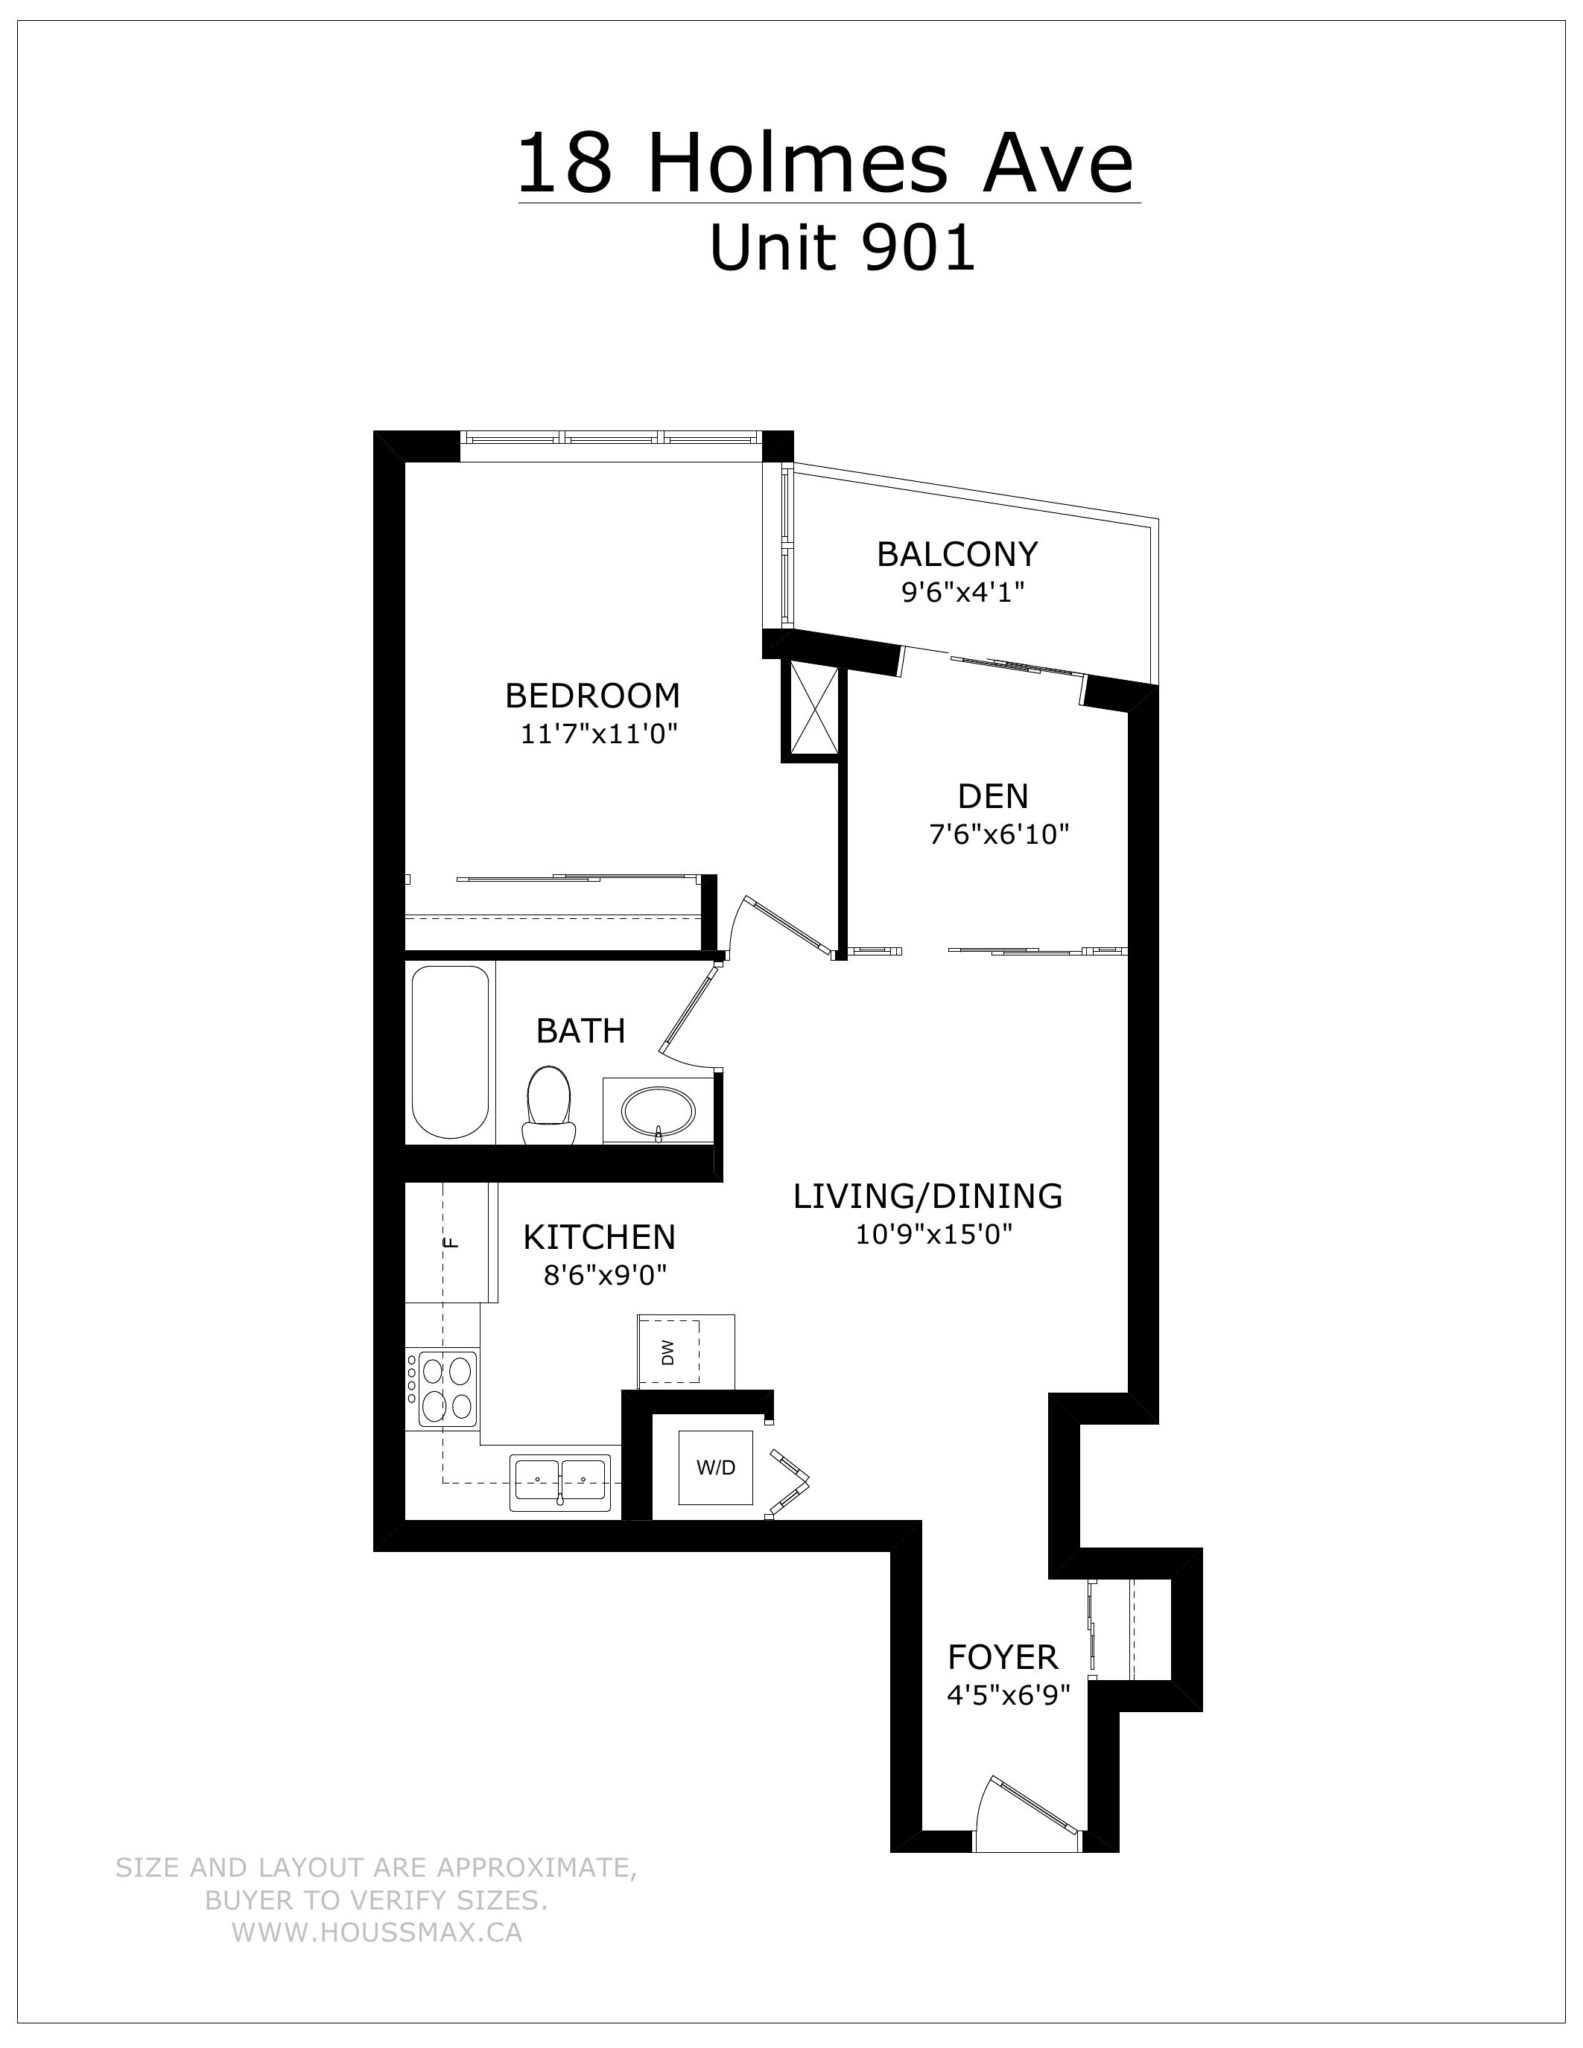 Floors plans and layout for 18 Holmes Avenue Unit 901